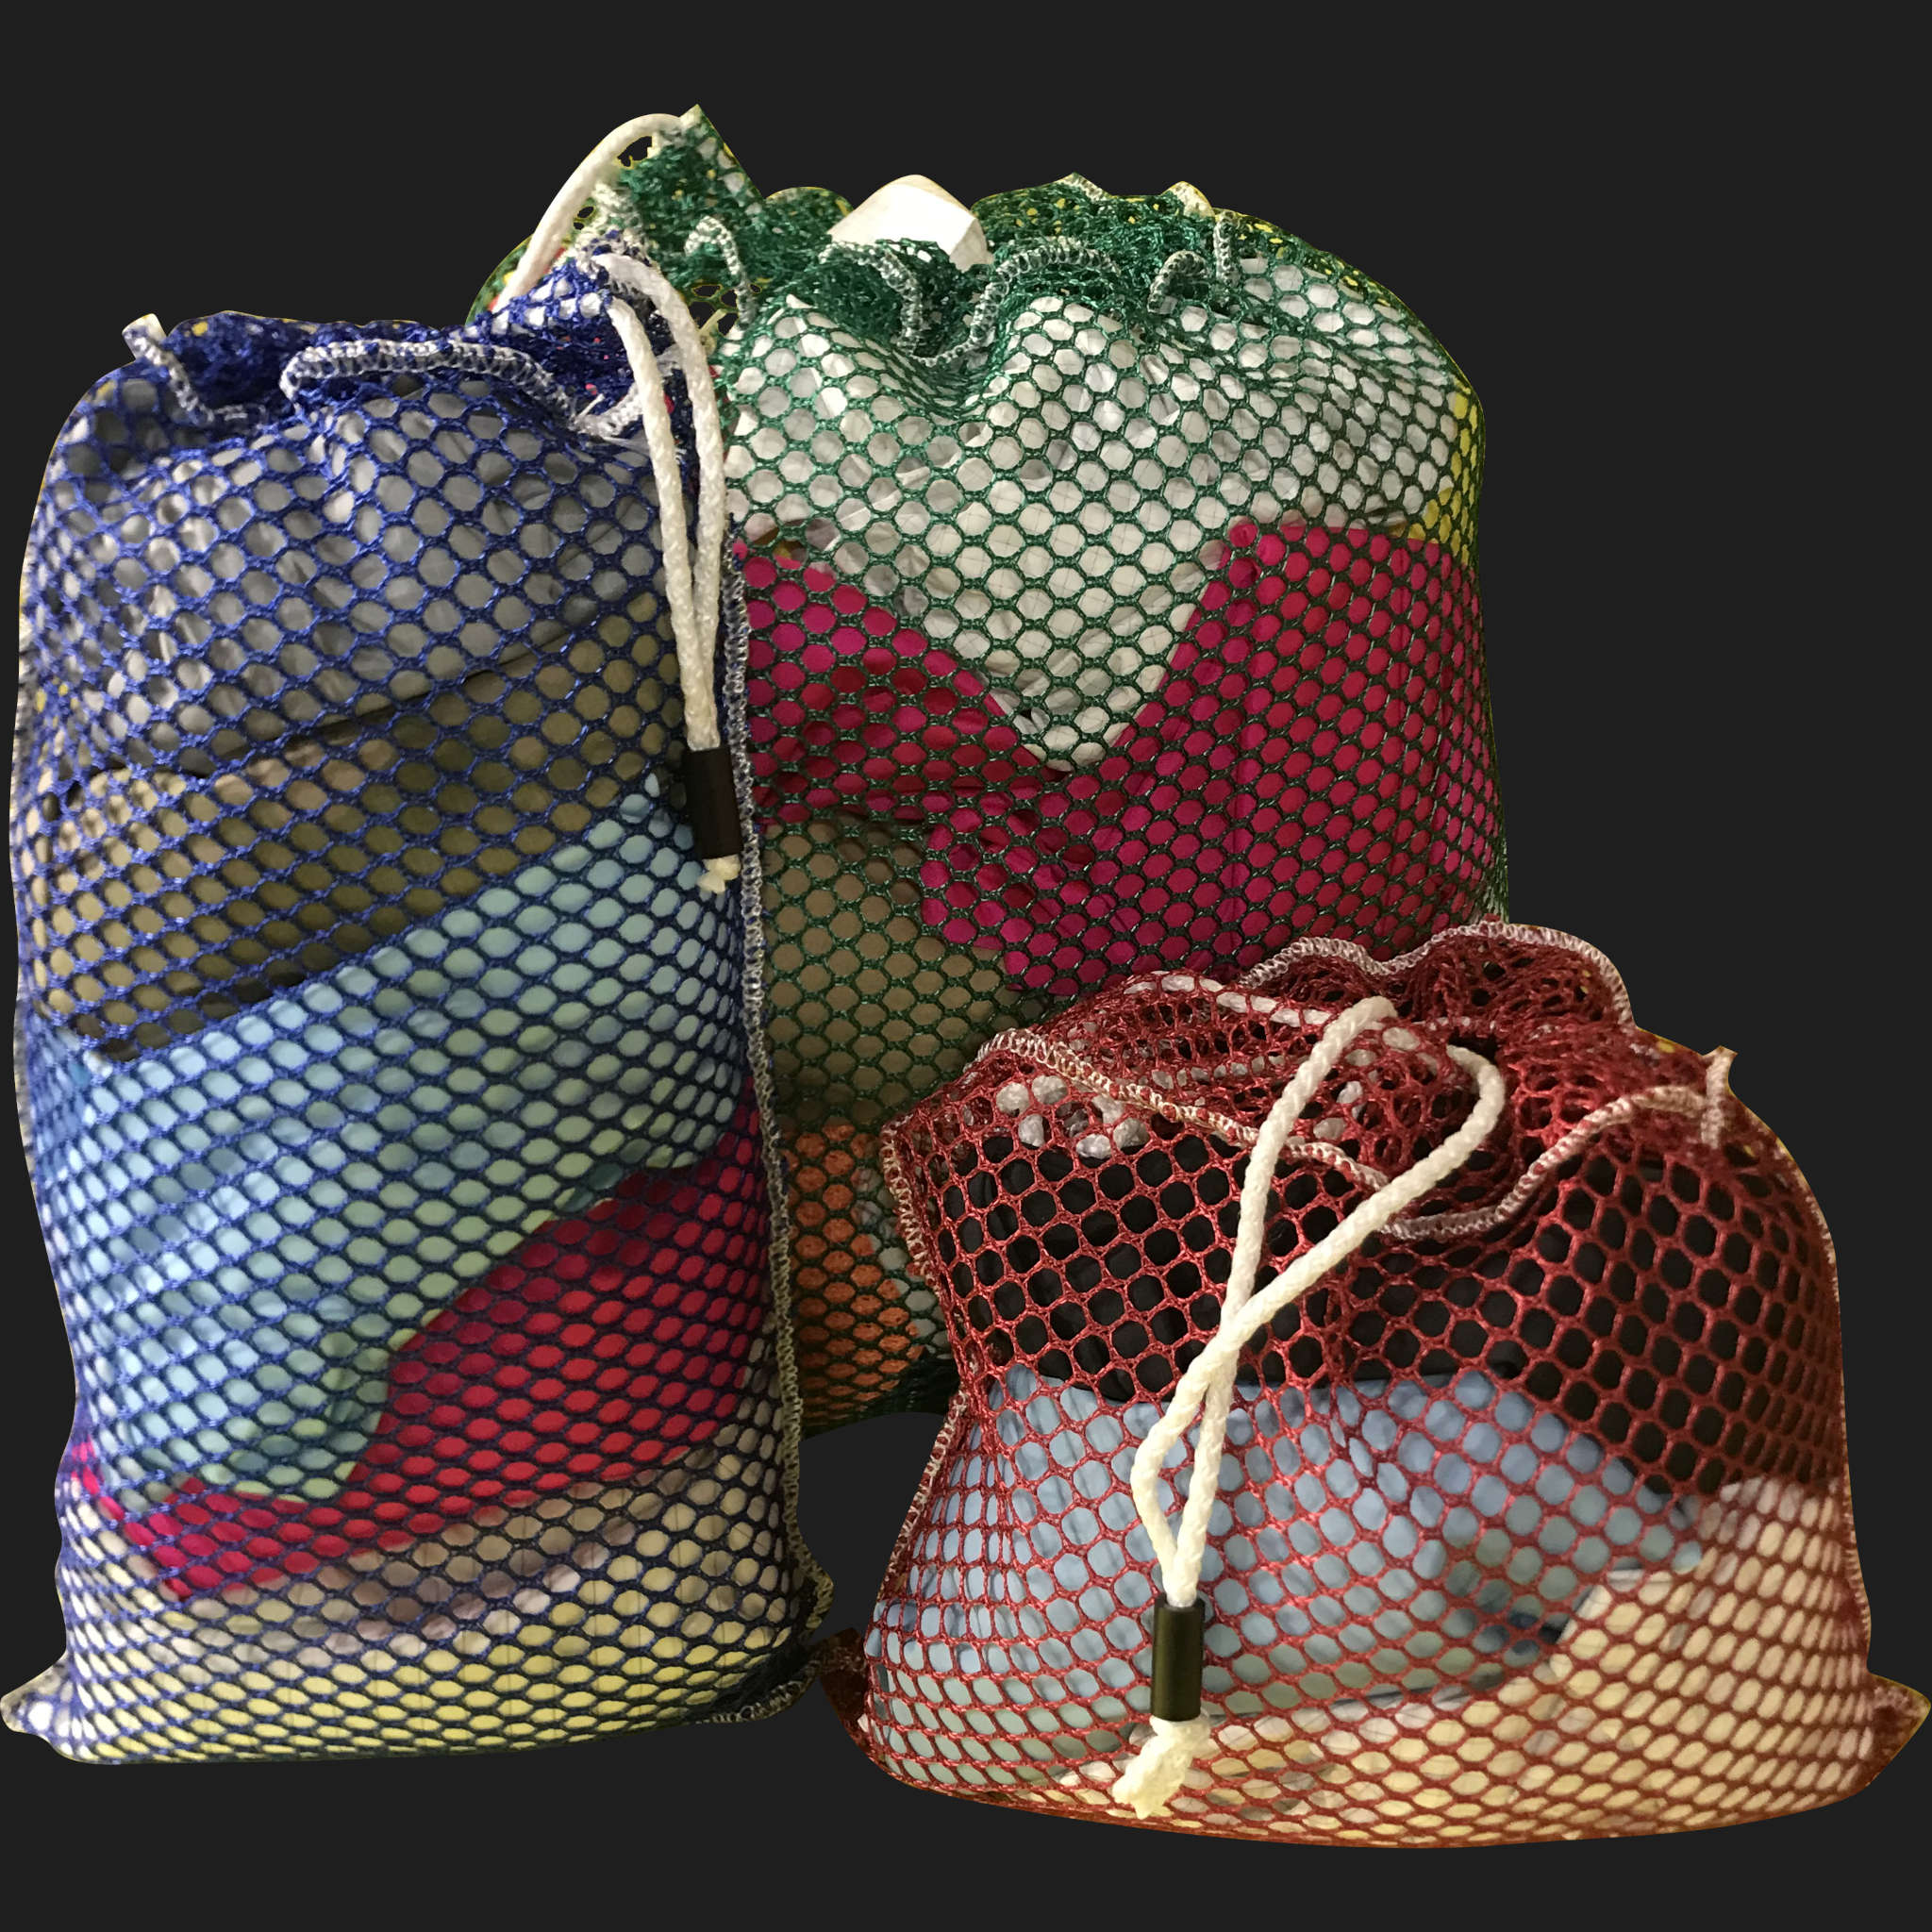 24" x 48" Customized Mesh-Net-Laundry Bags Heavy Duty with Cord and barrellock closure